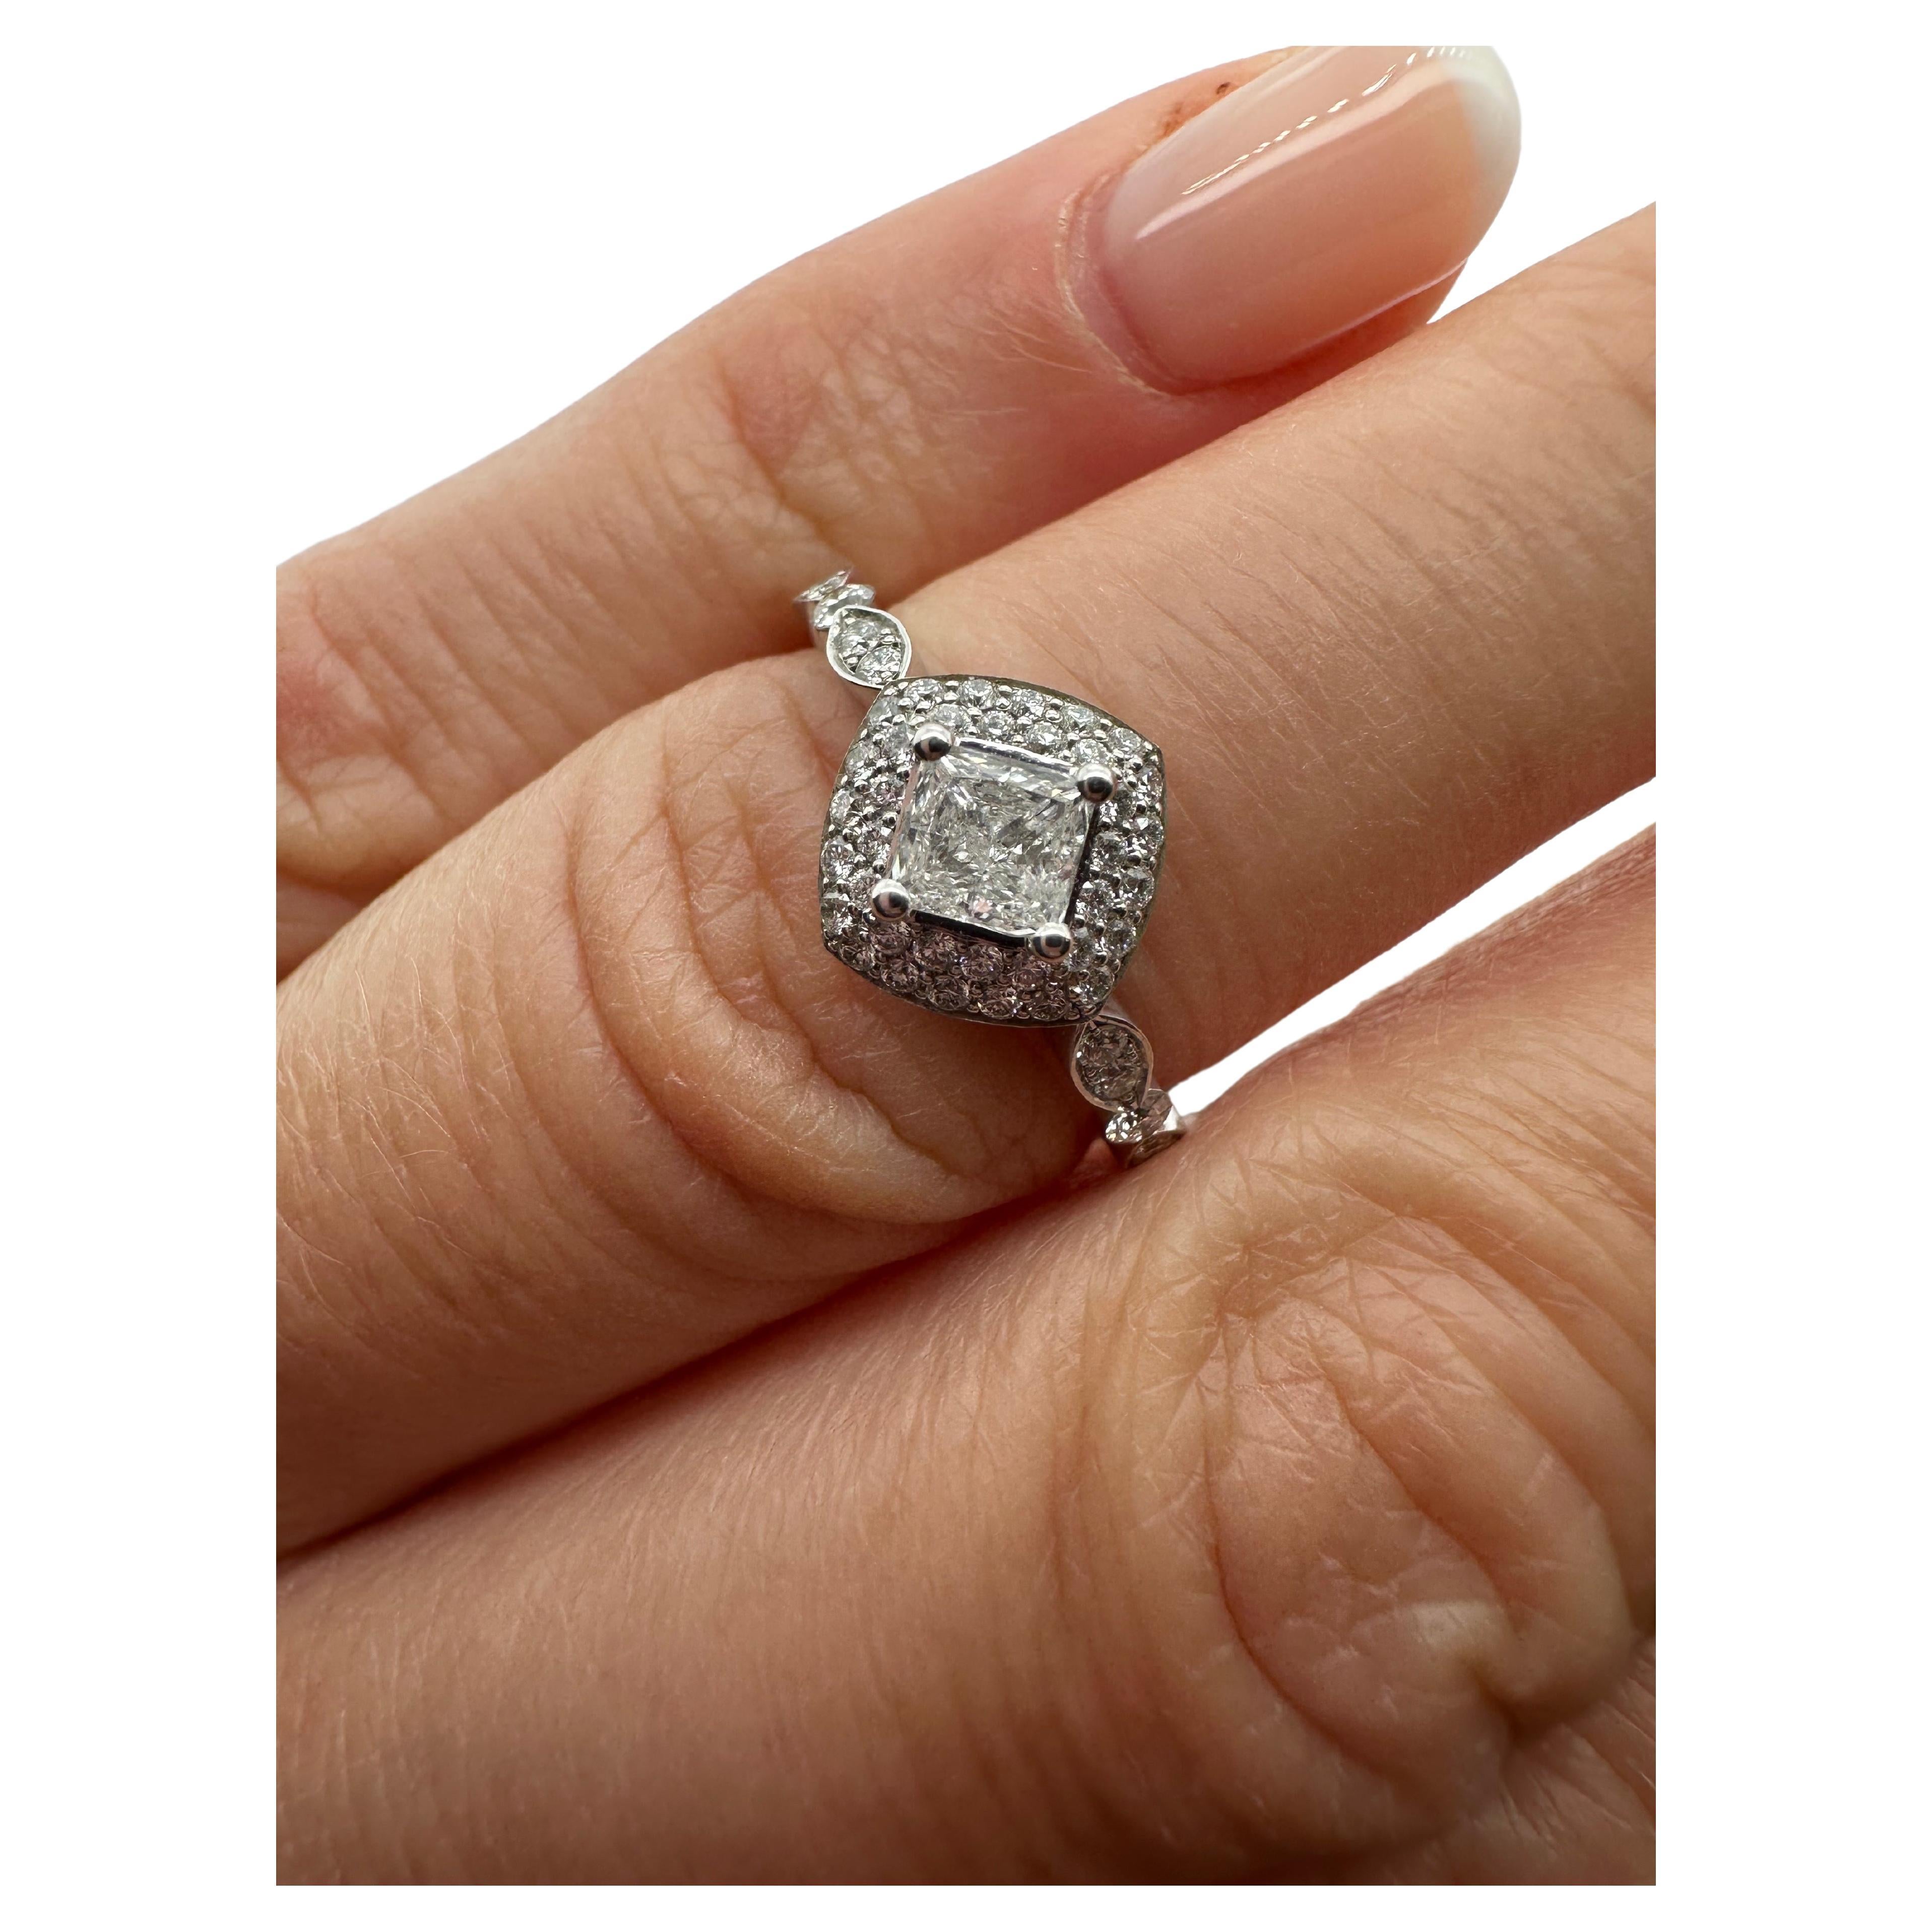 Complex diamond ring with princess cut diamond in center and pave set diamonds in doubke halo, made with marquise design and Victorian motif in 18KT white gold!

Metal Type: 18KT

Natural Diamond CENTER(s):
Color: G
Cut:Square Brilliant(Princess